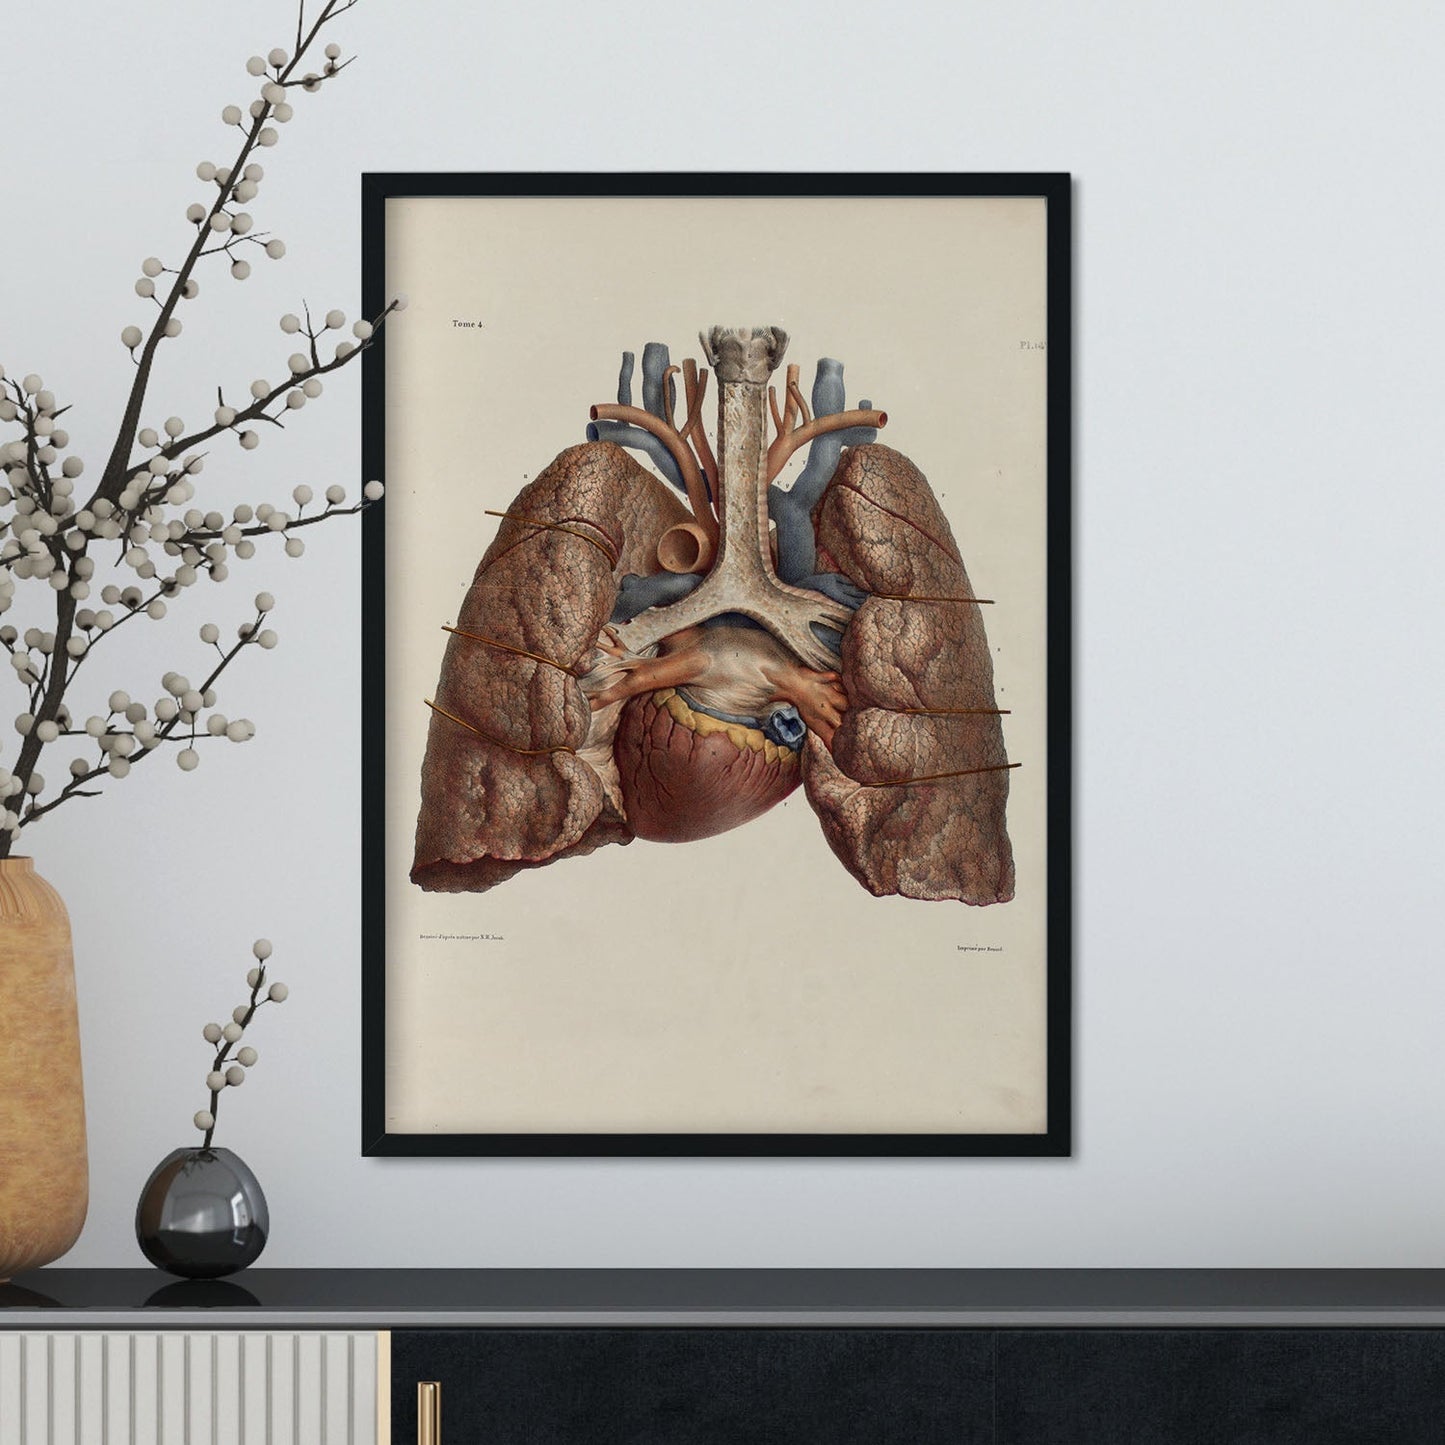 Heart, lungs, trachea and laryngeal cartilages-Artwork-Nacnic-Nacnic Estudio SL